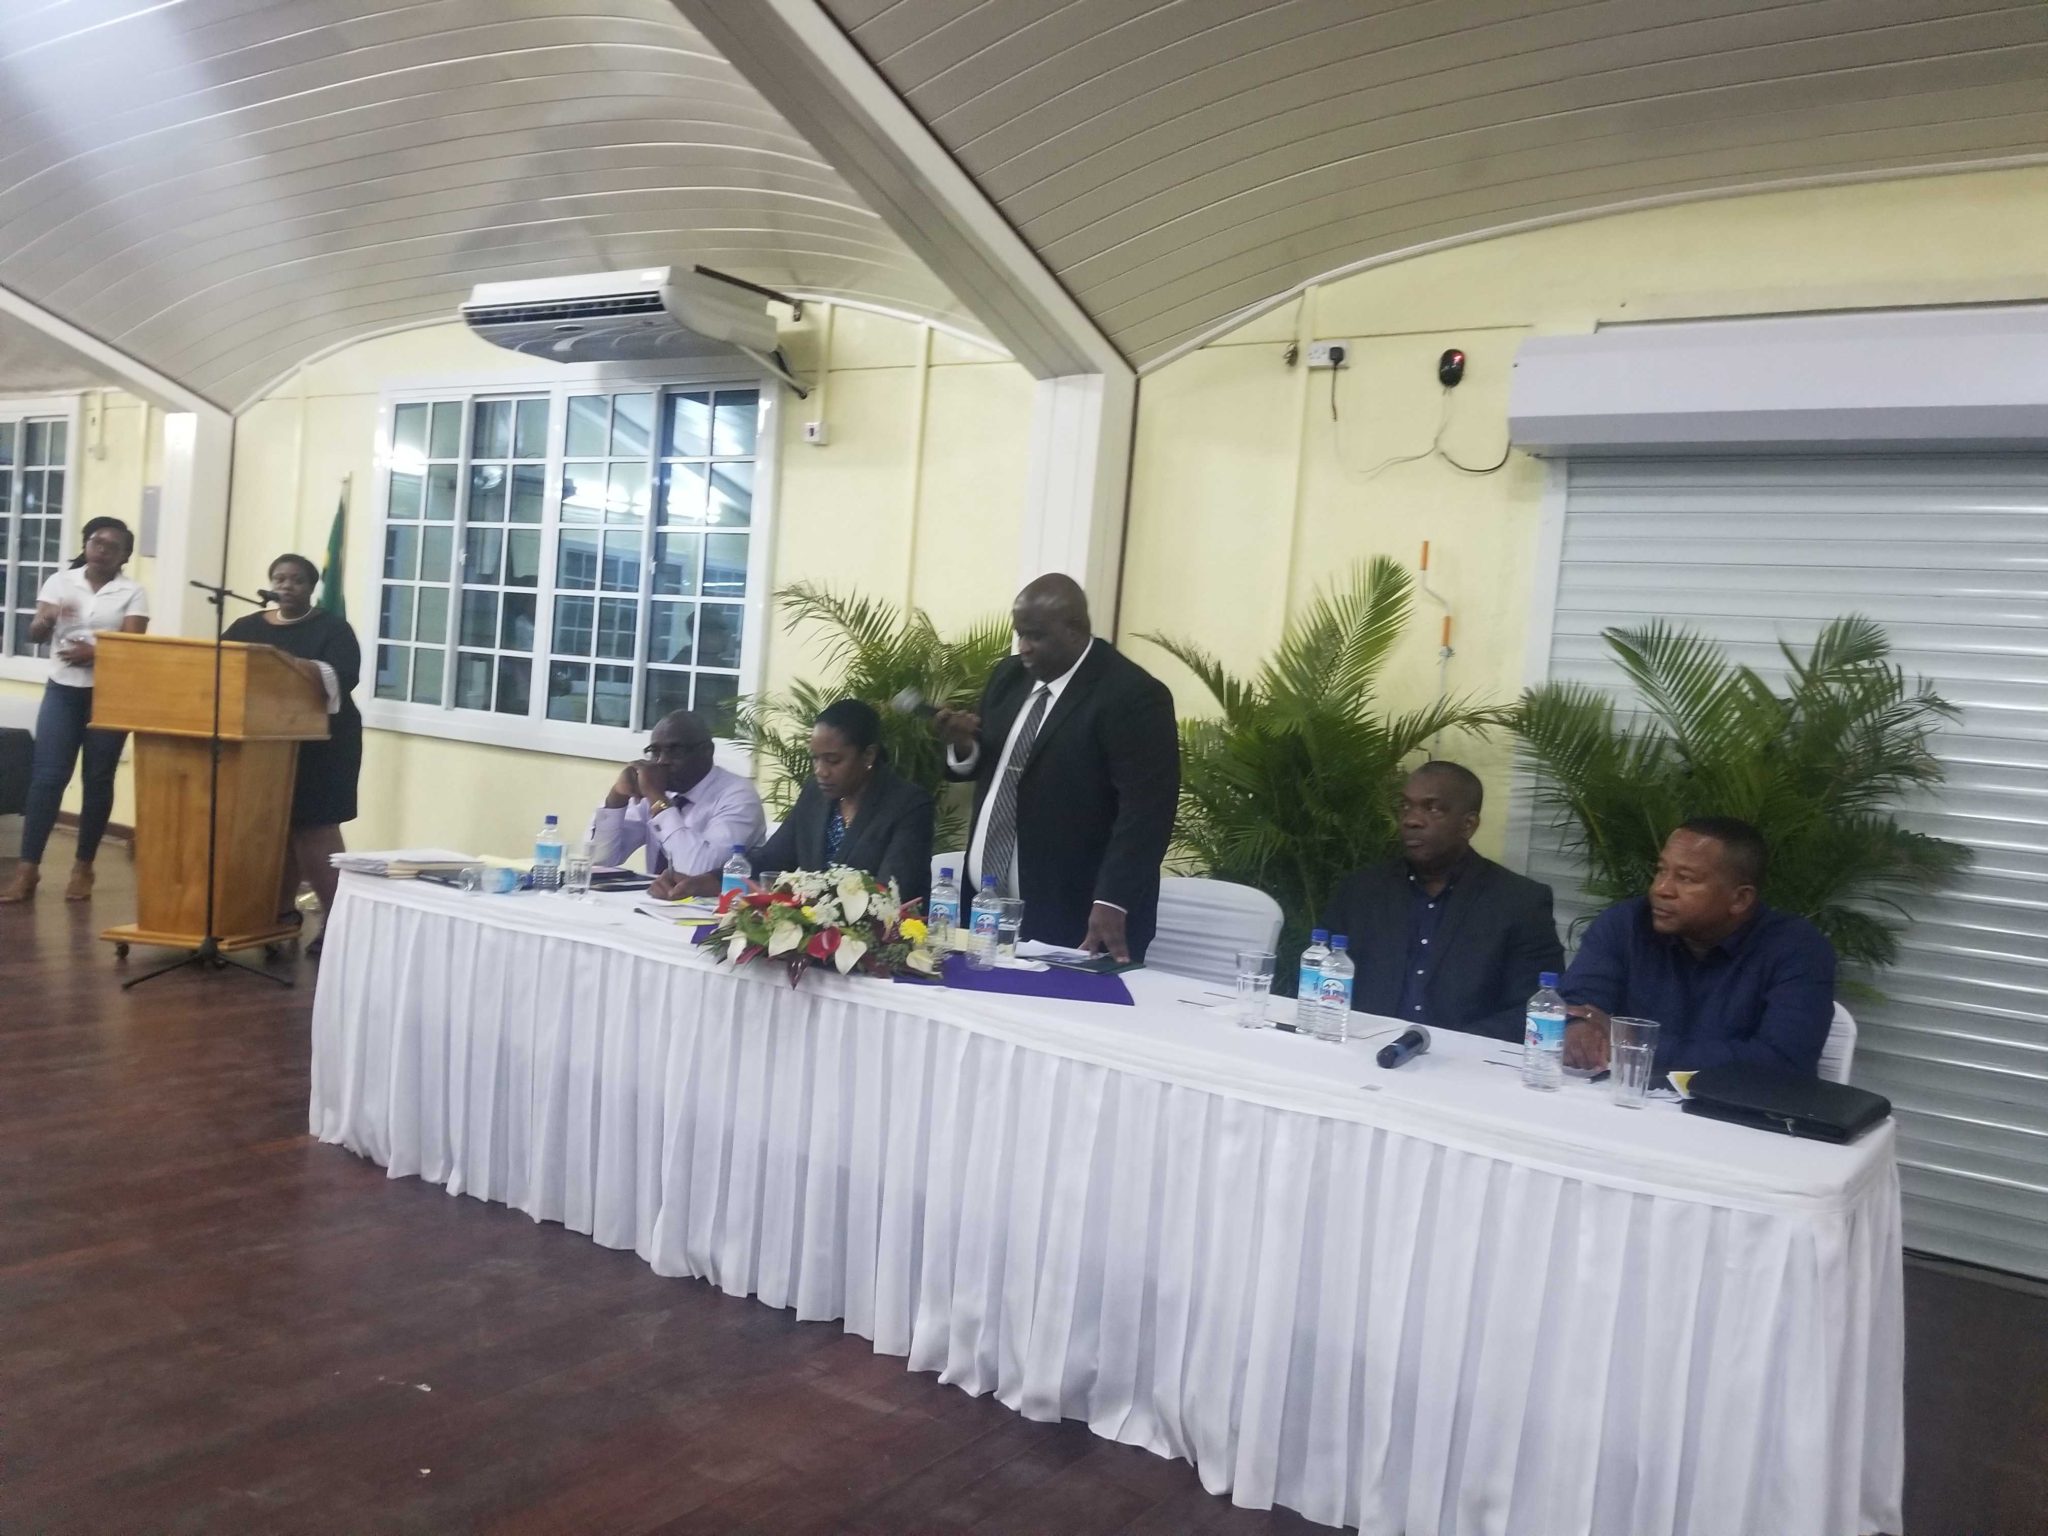 Attorney General says that there are obstacles in the way of electoral reform in Dominica